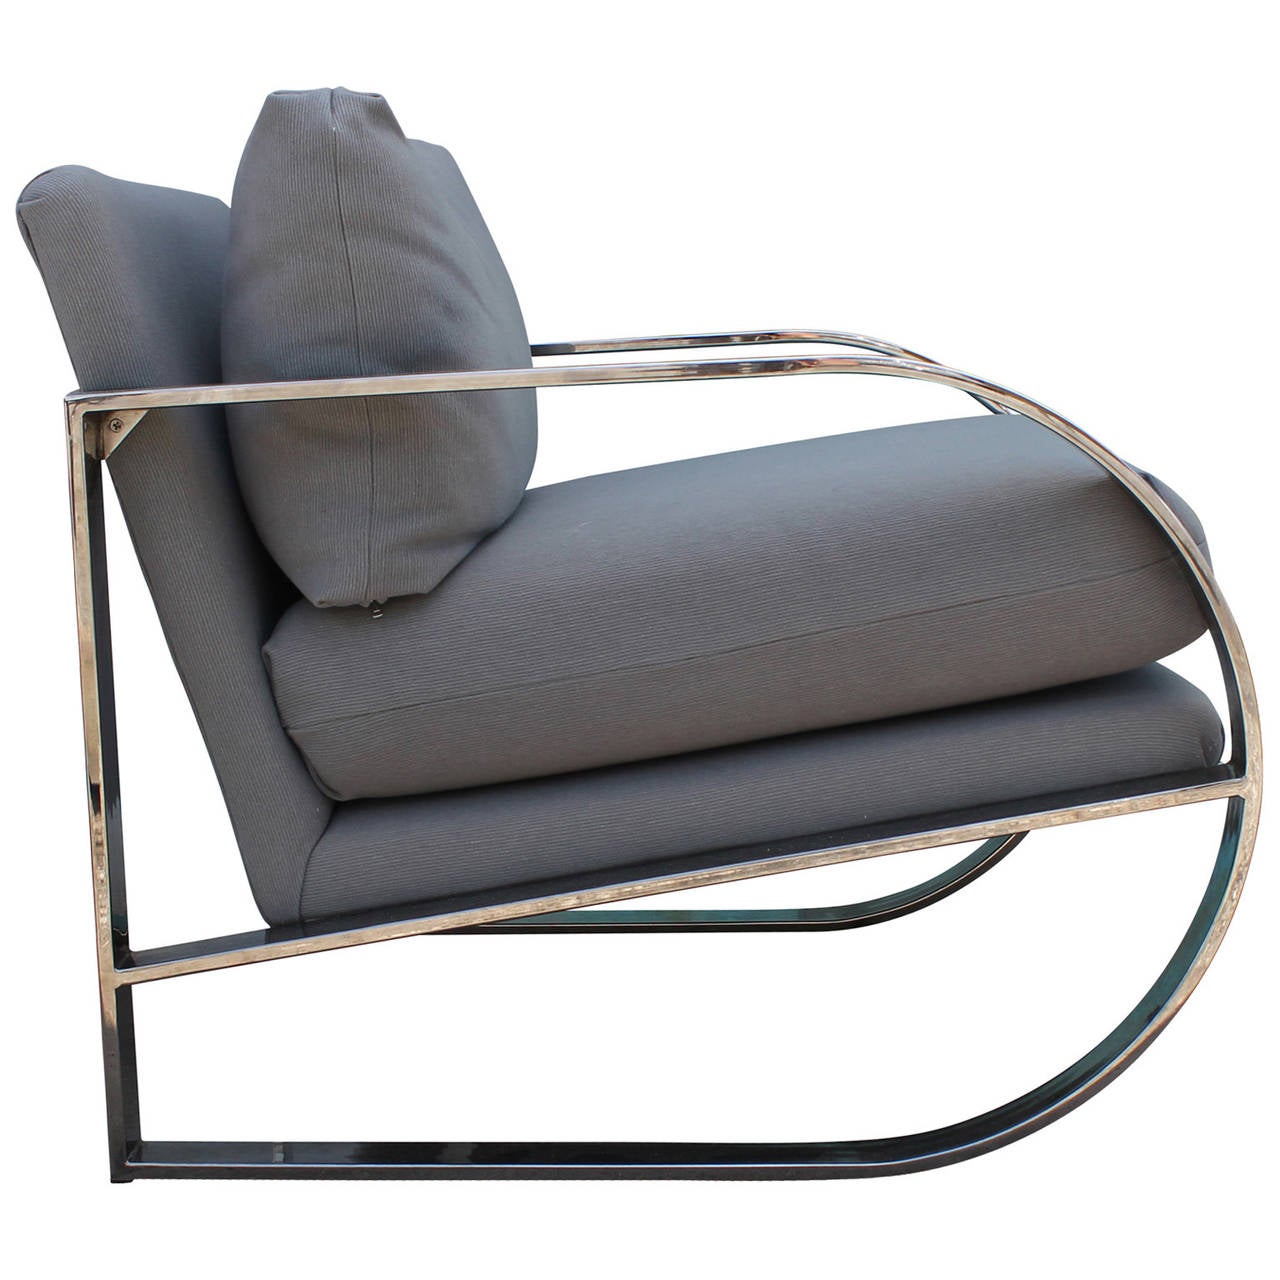 American Pair of Large Chrome Lounge Chairs